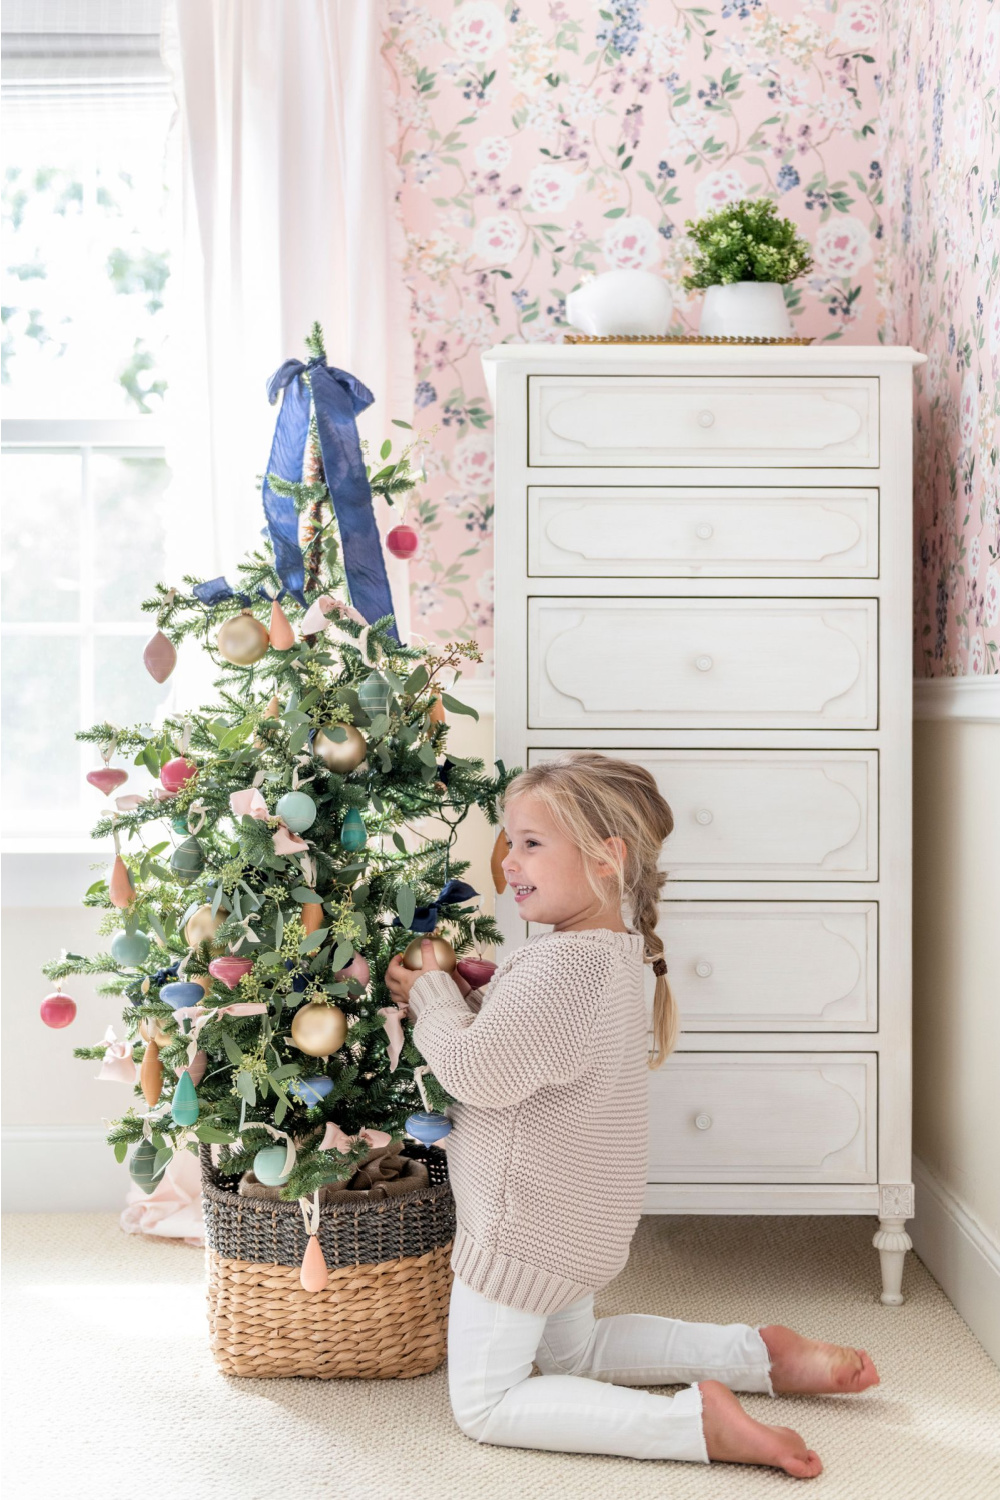 Brooke and Lou's holiday collection 2019 - a lovely little Christmas tree in a girl's room with pink floral wallpaper...charming! #brookeandlou #pinkchristmas #kidsrooms